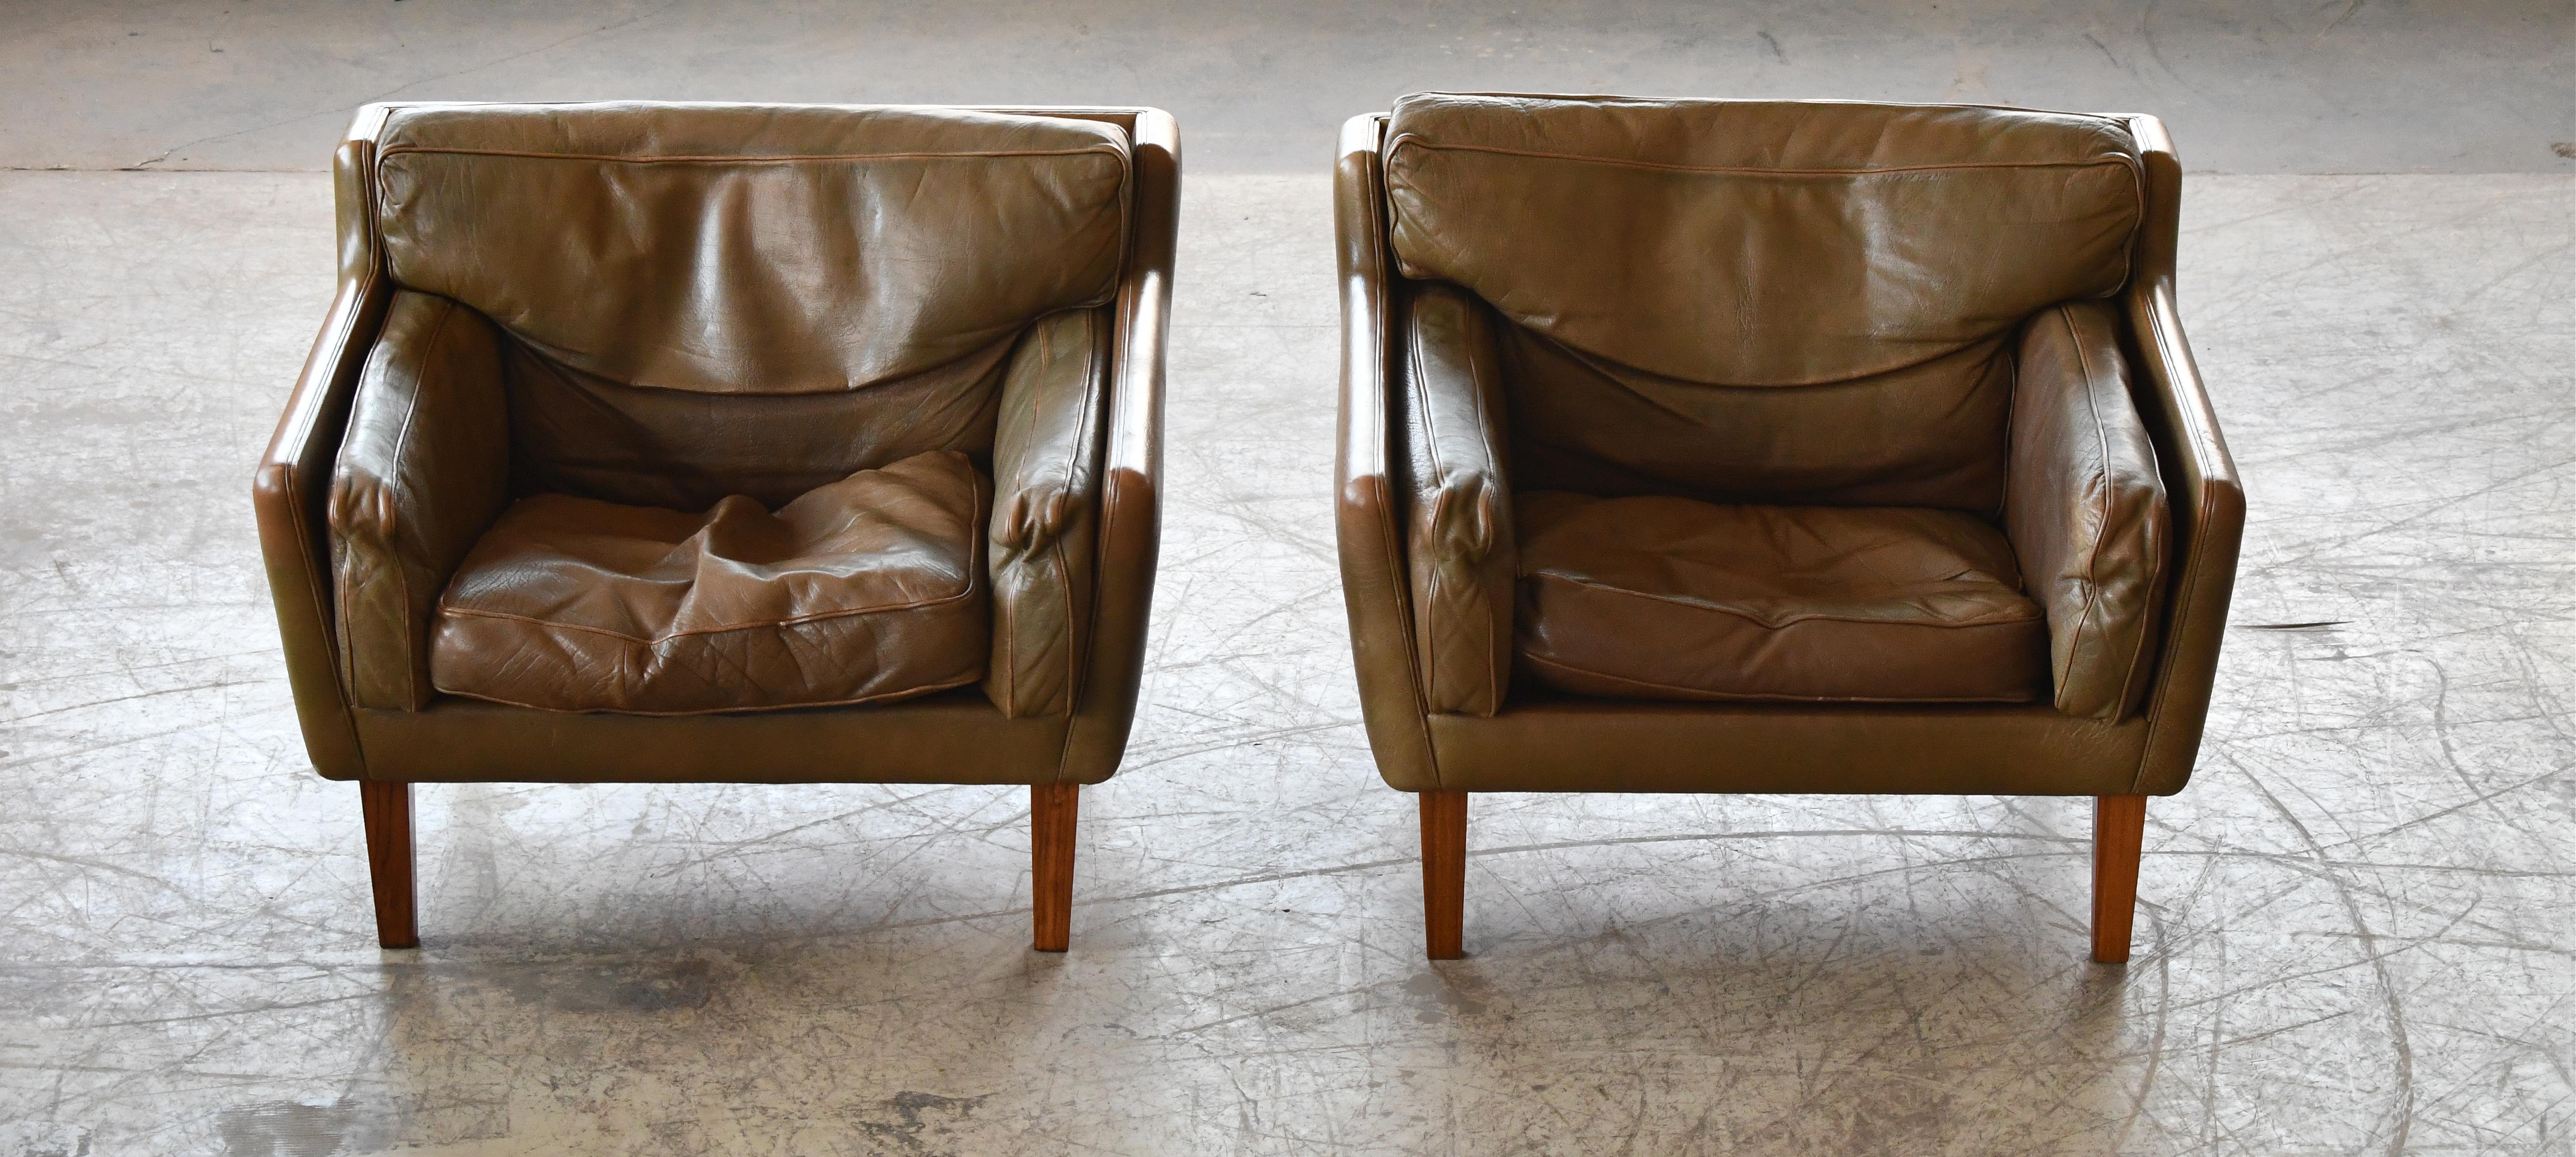 Mid-Century Modern Pair of 1960's Olive Brown Leather Lounge Chairs with Ottoman by Illum Wikkelsø